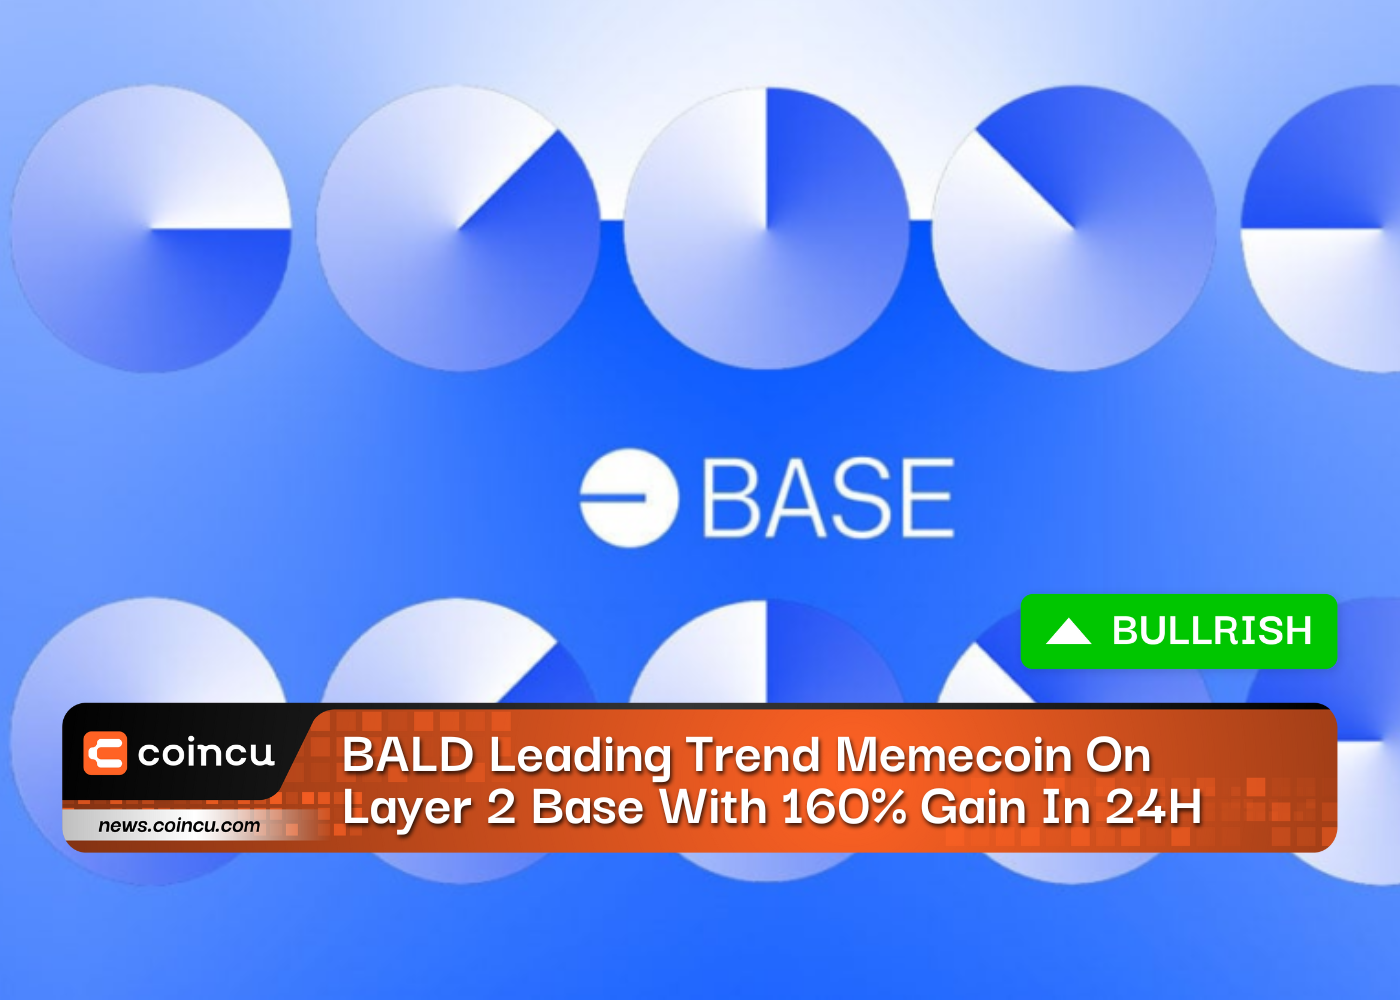 BALD Leading Trend Memecoin On Layer 2 Base With 160% Gain In 24H